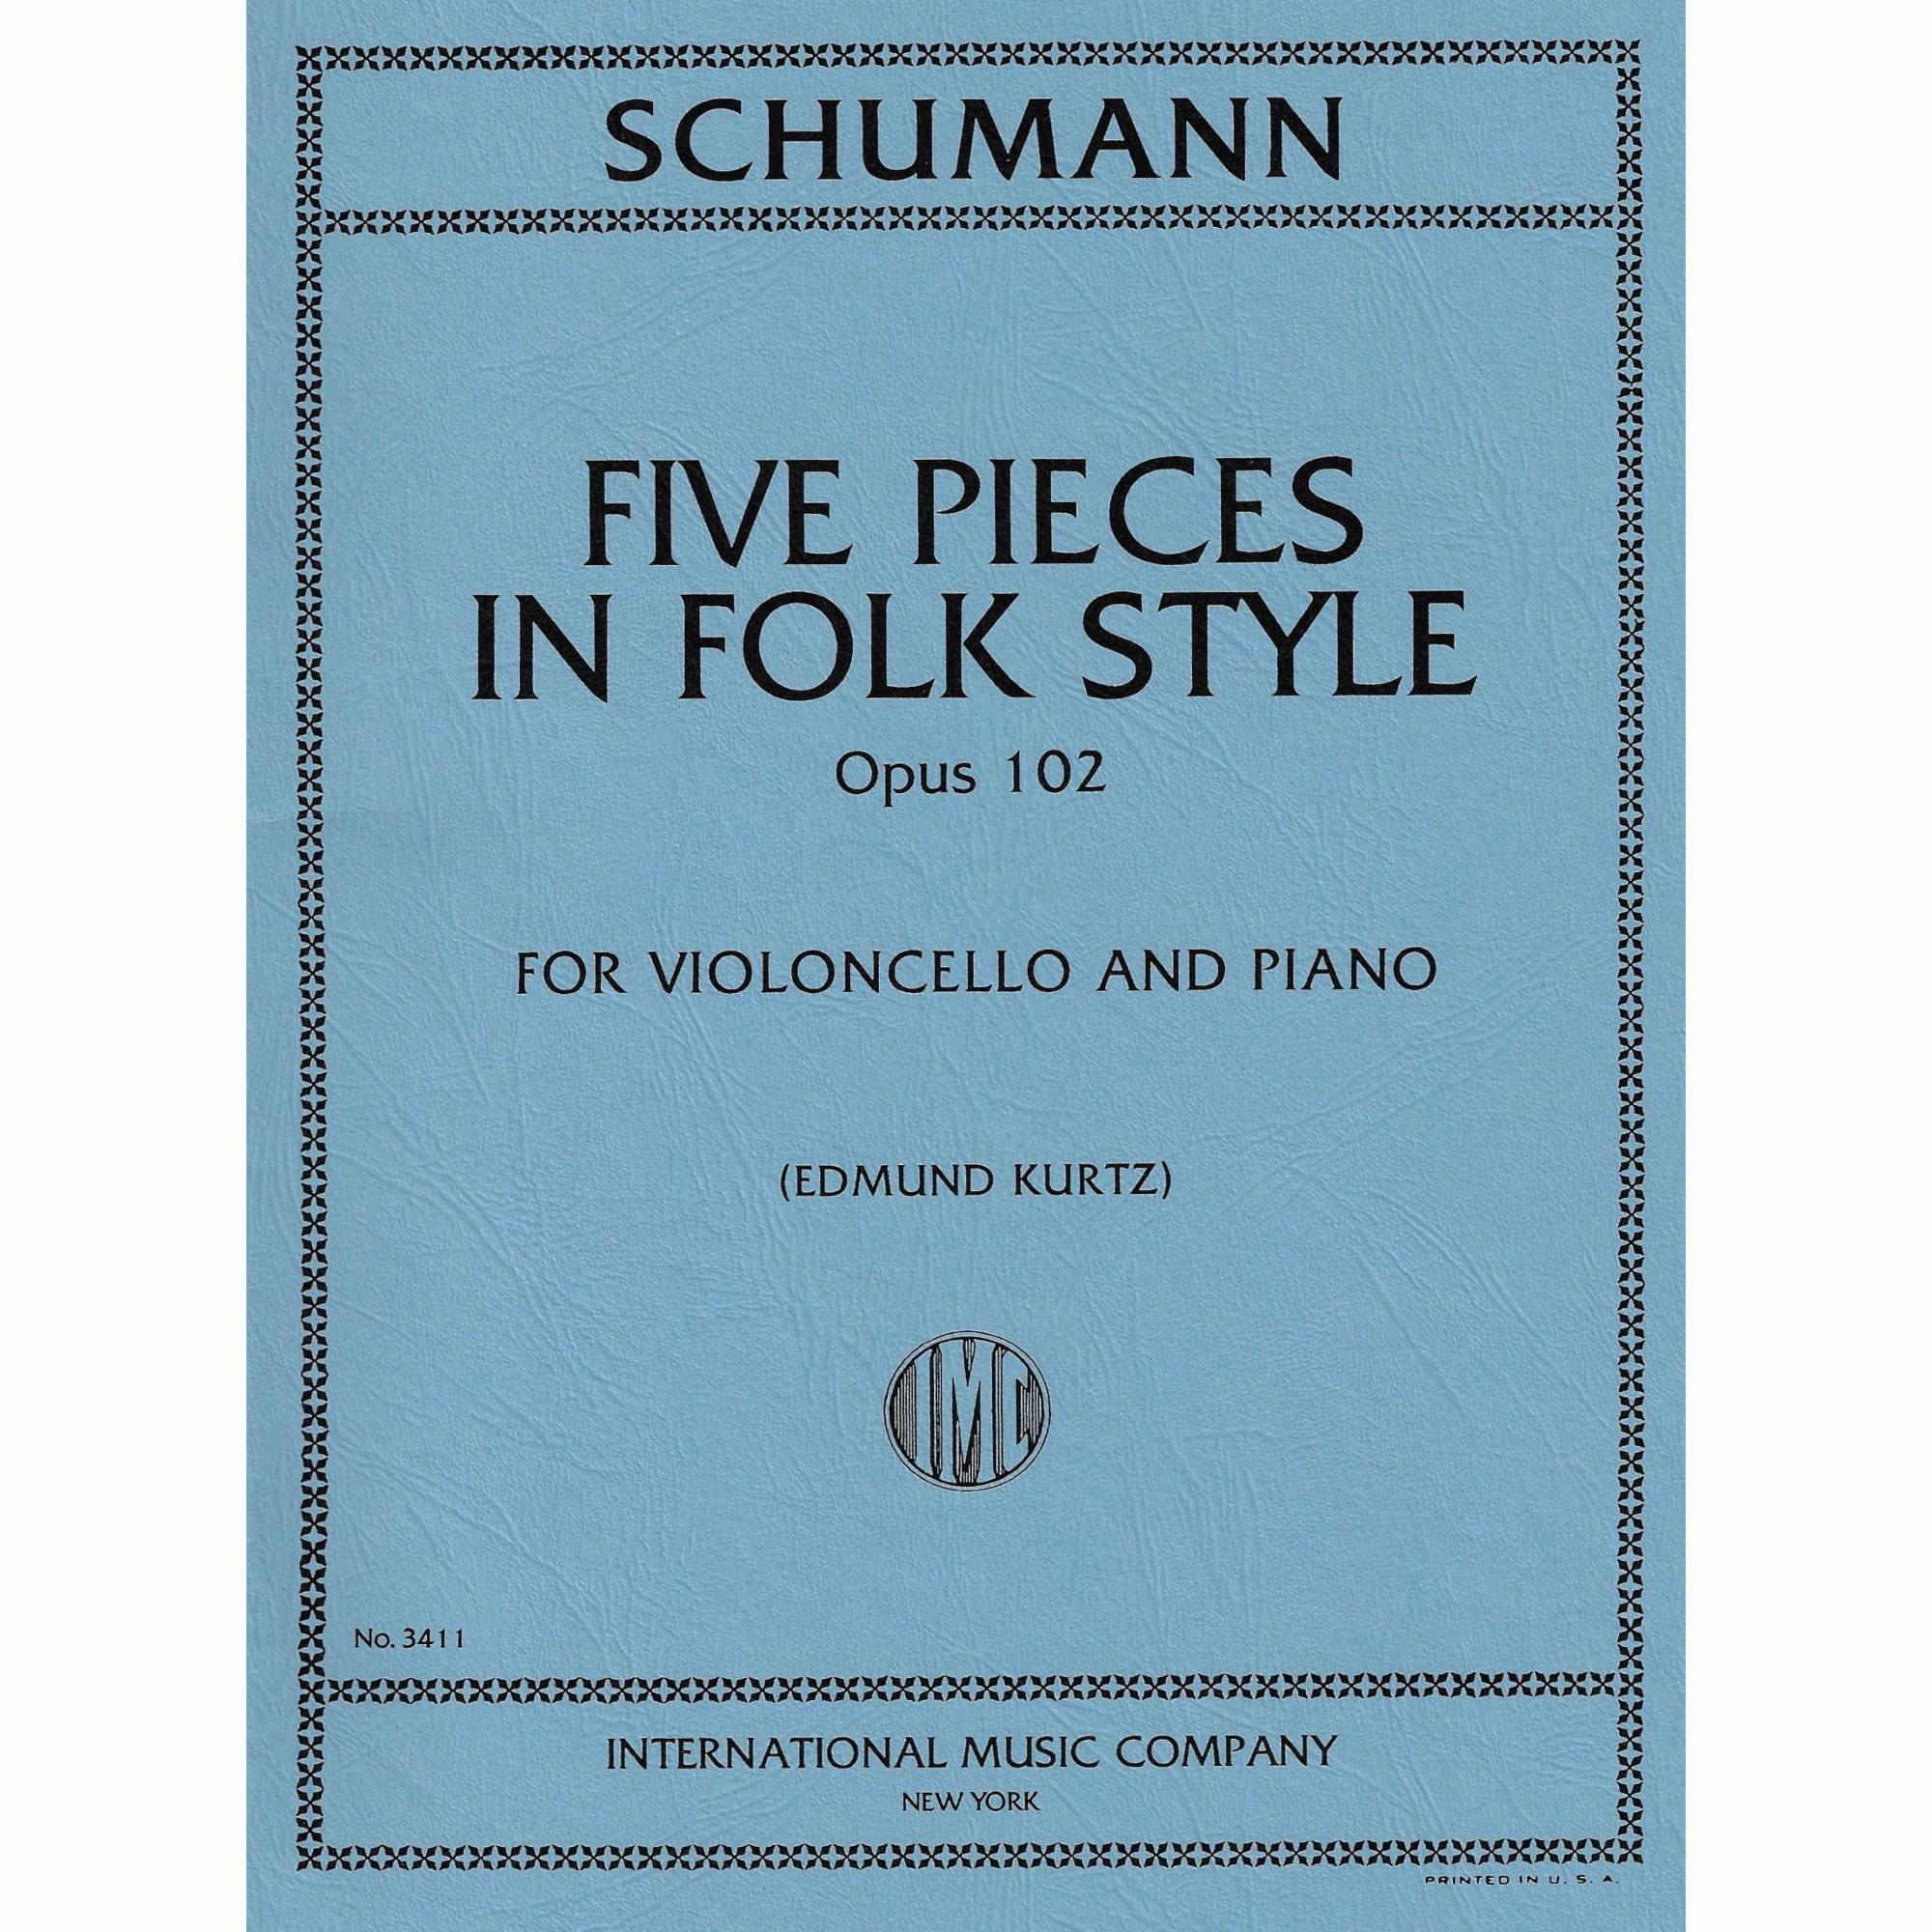 Five Pieces in Folk Style, Op. 102 for Cello and Piano